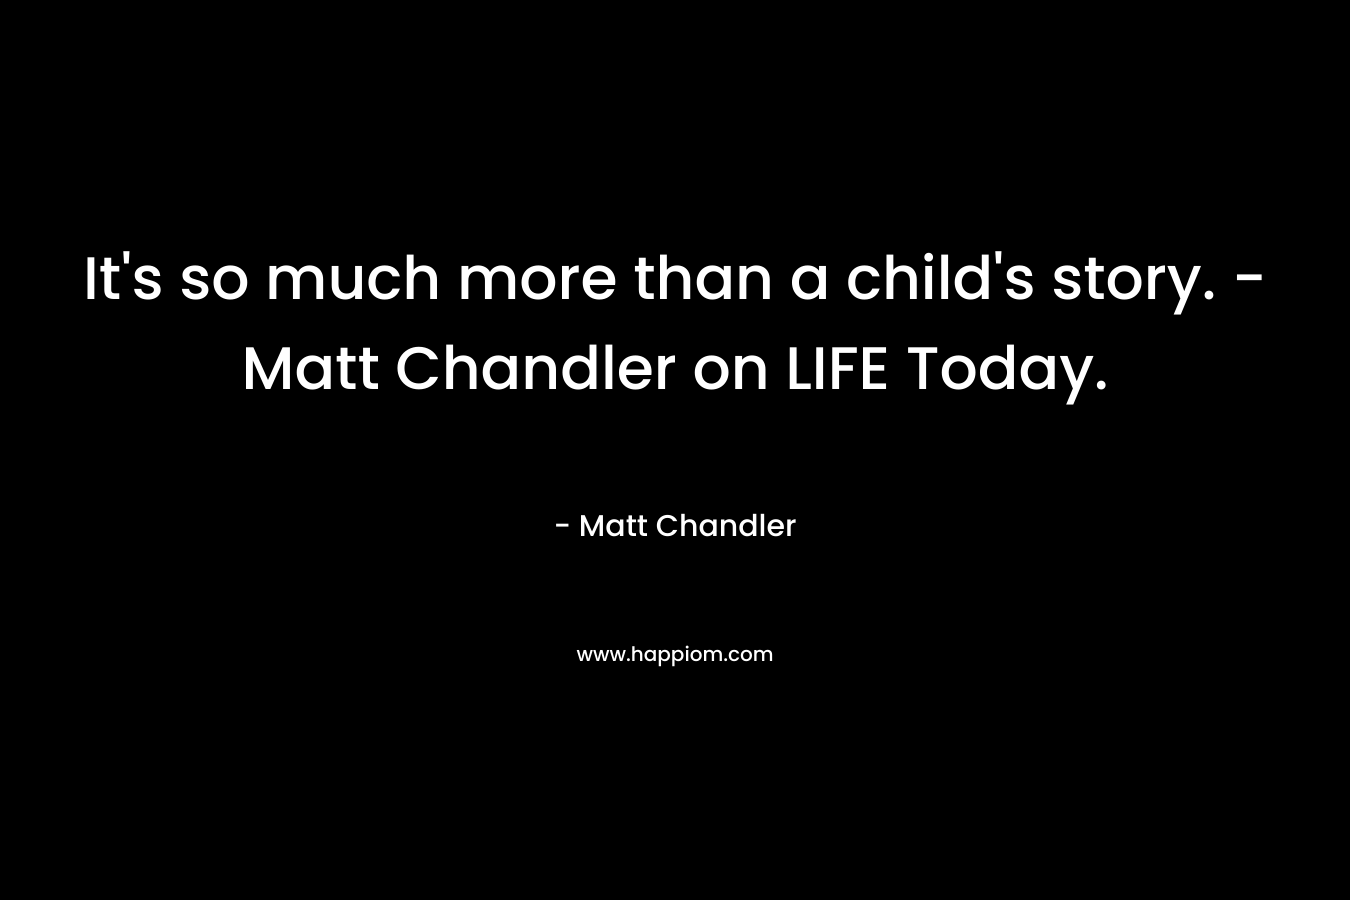 It's so much more than a child's story. - Matt Chandler on LIFE Today.